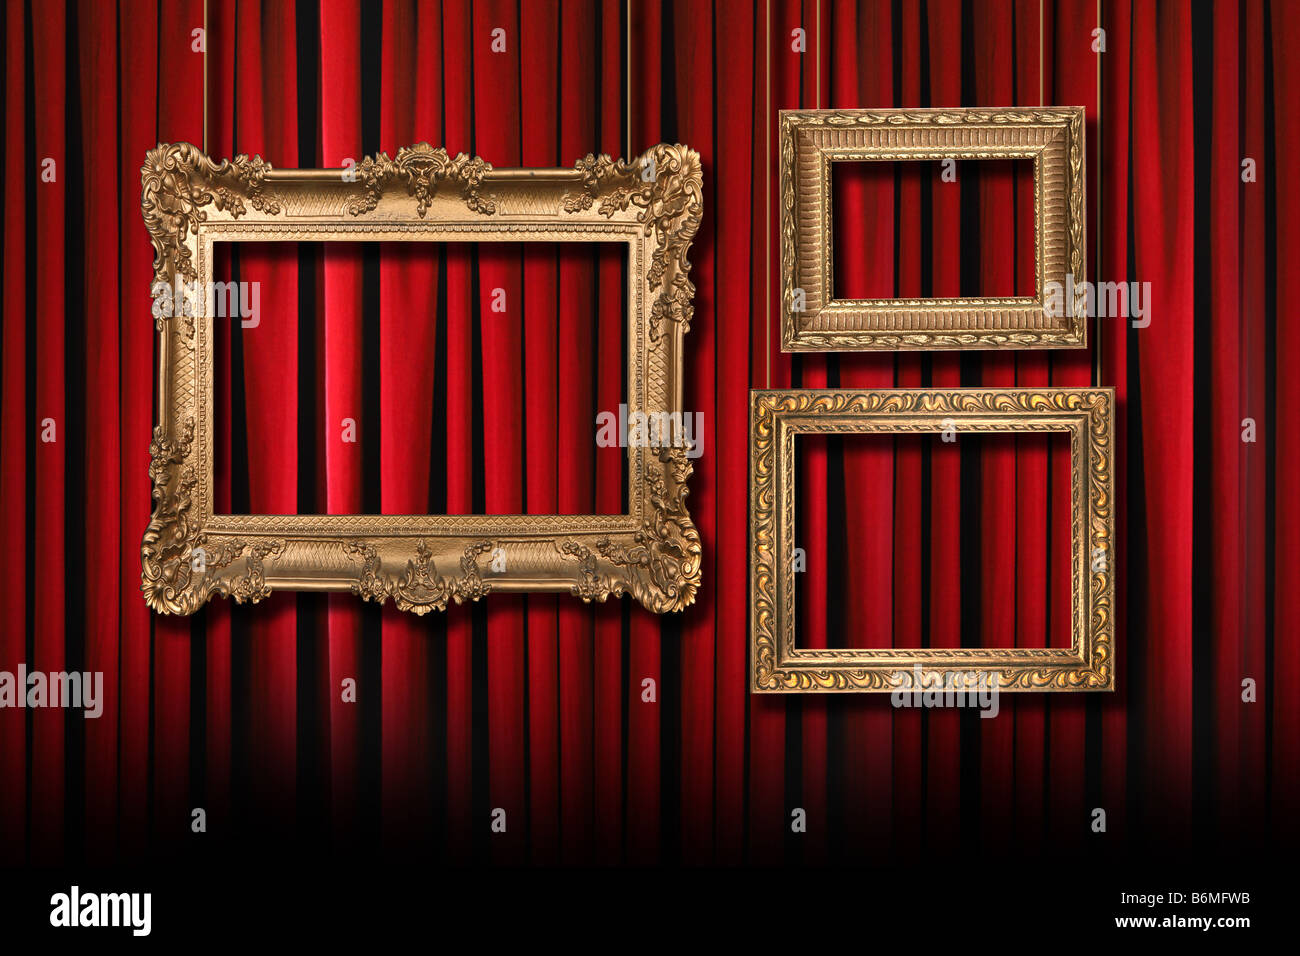 Red Stage Theater Curtains With 3 Hanging Gold Frames Stock Photo - Alamy